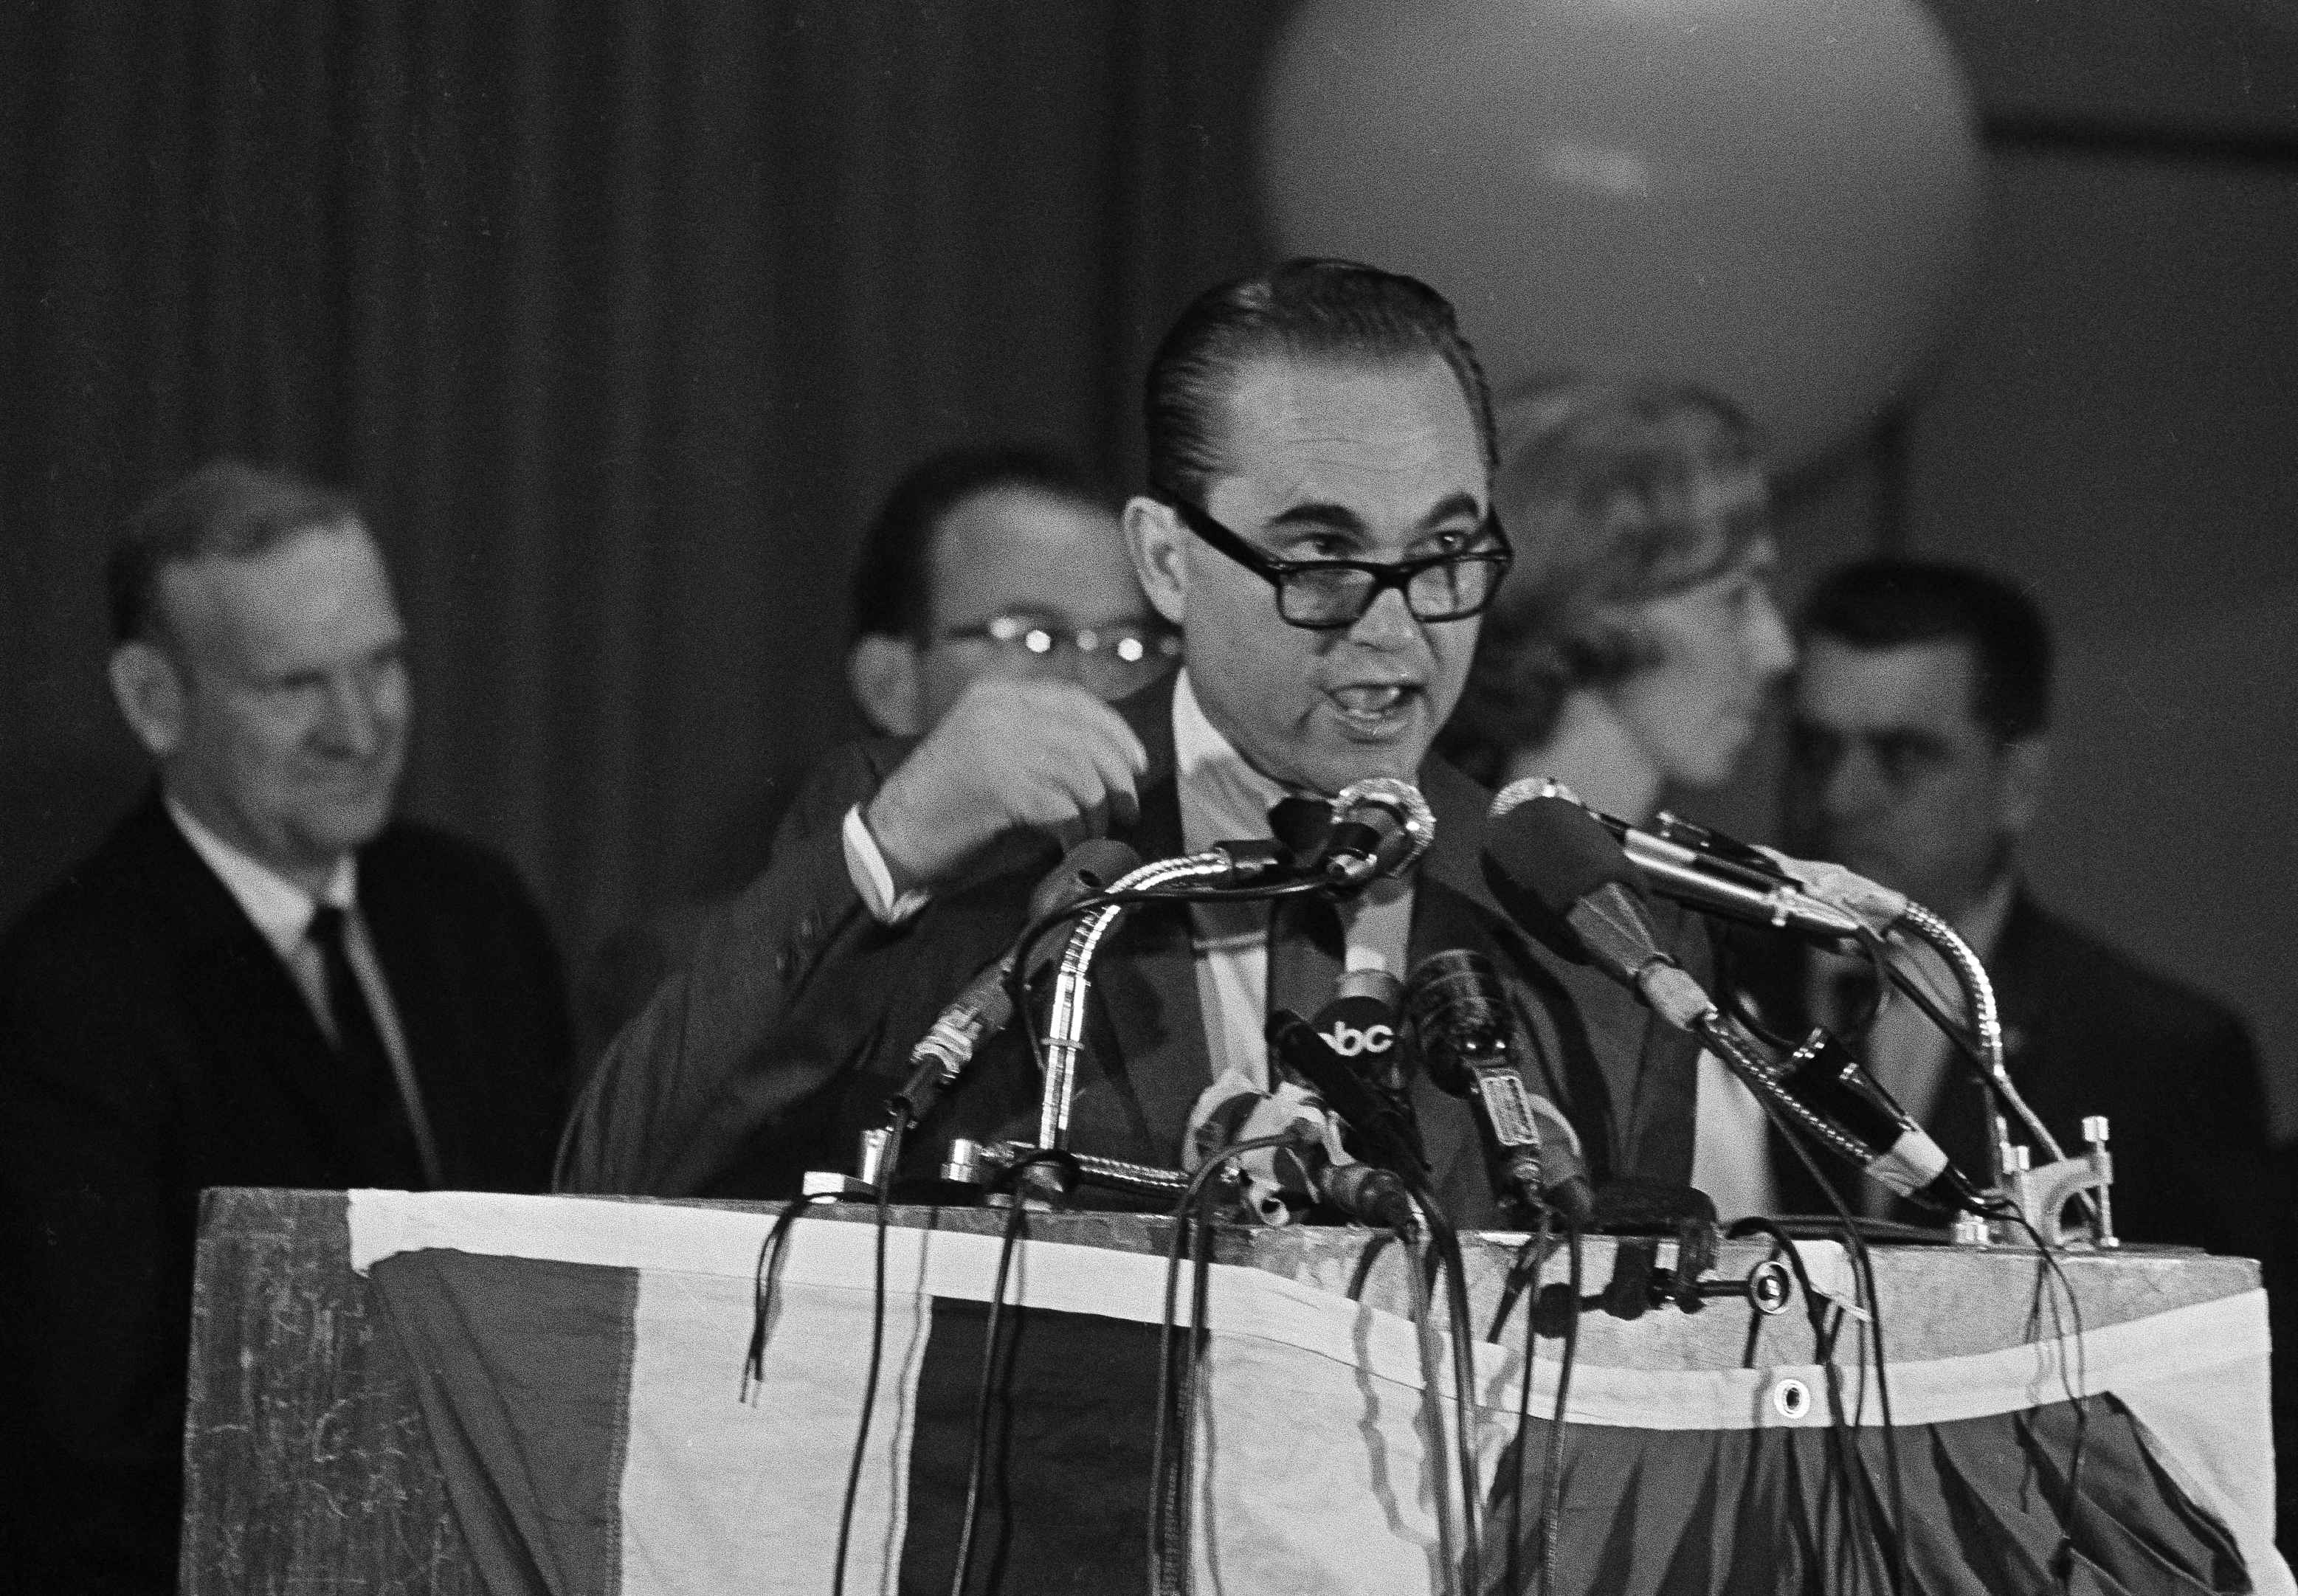 George Wallace speaks to a large crowd at Cobo Hall arena in Detroit, Mich., Oct. 29, 1968. (AP Photo/Paul Shane)